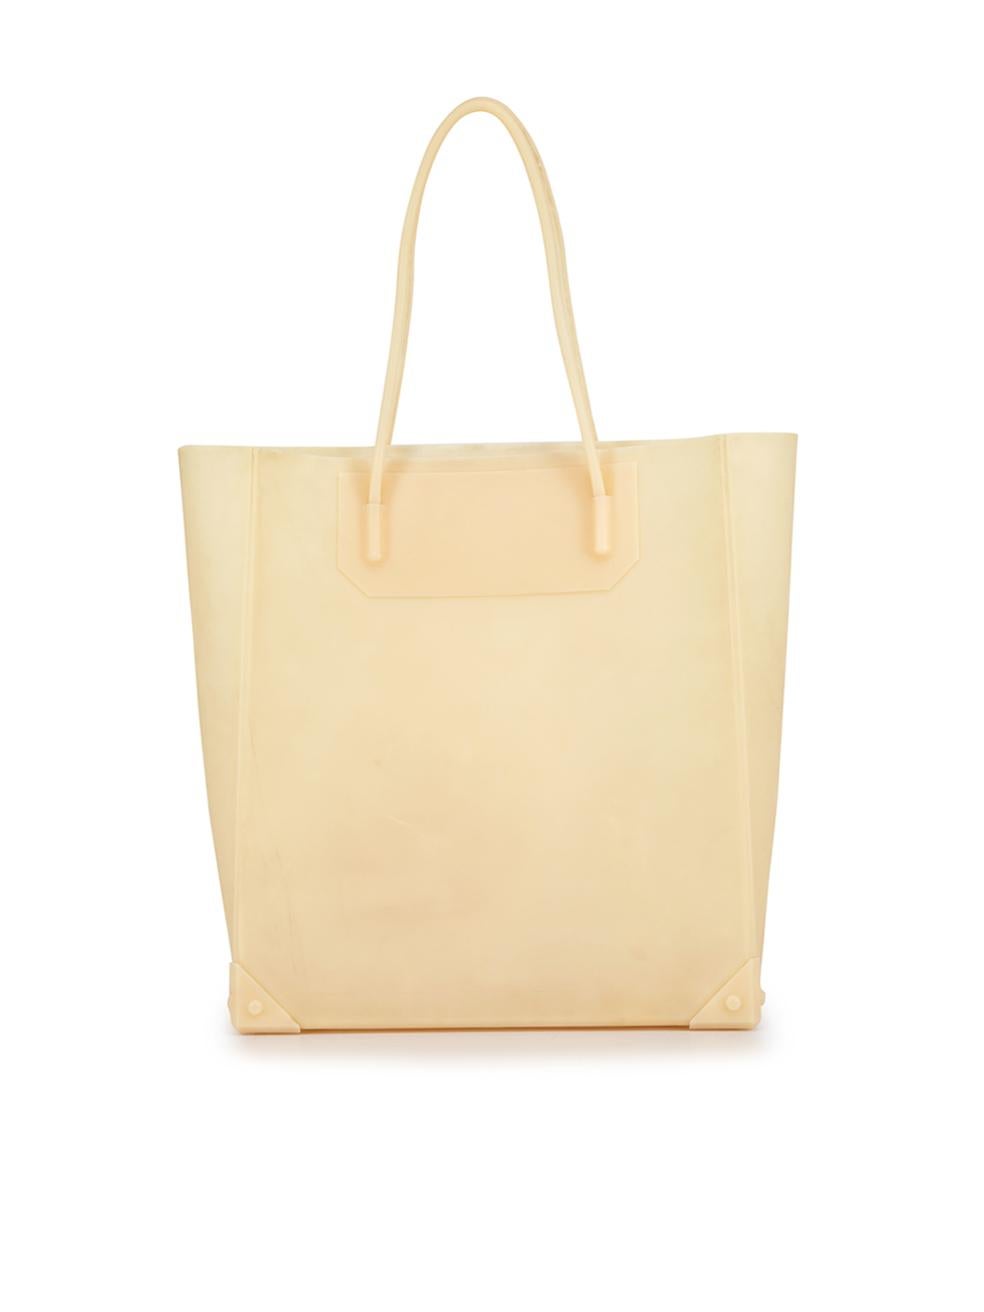 Alexander Wang Women's Beige Silicone Prisma Tote In Good Condition For Sale In London, GB